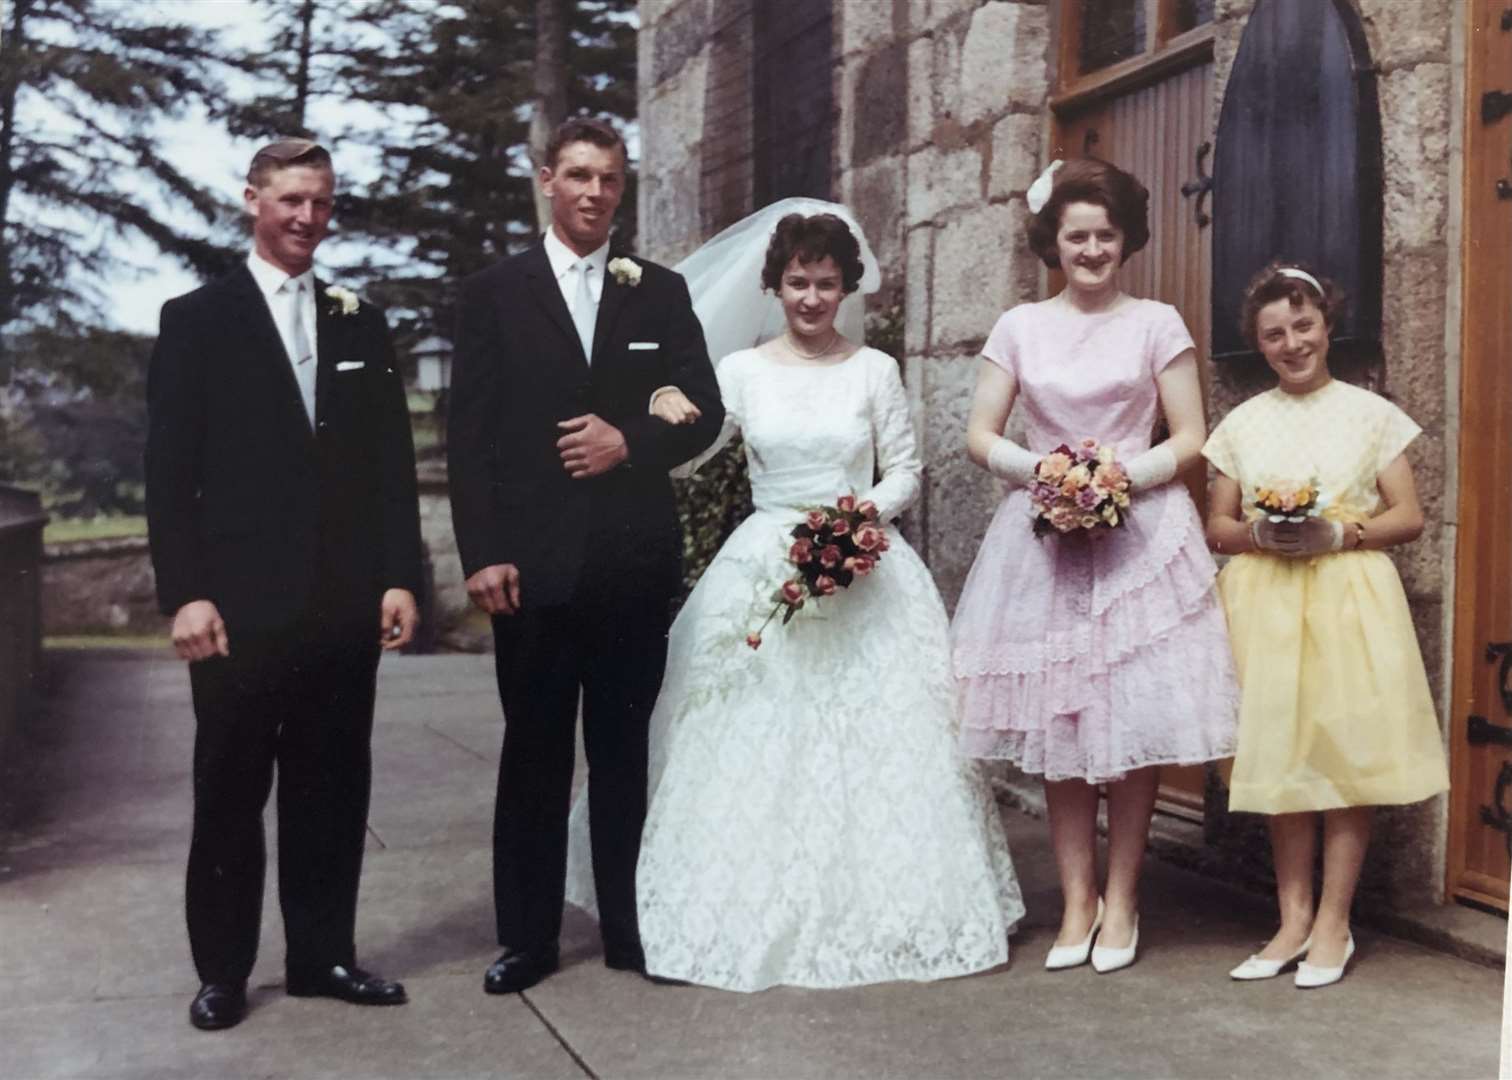 The wedding party in 1963.